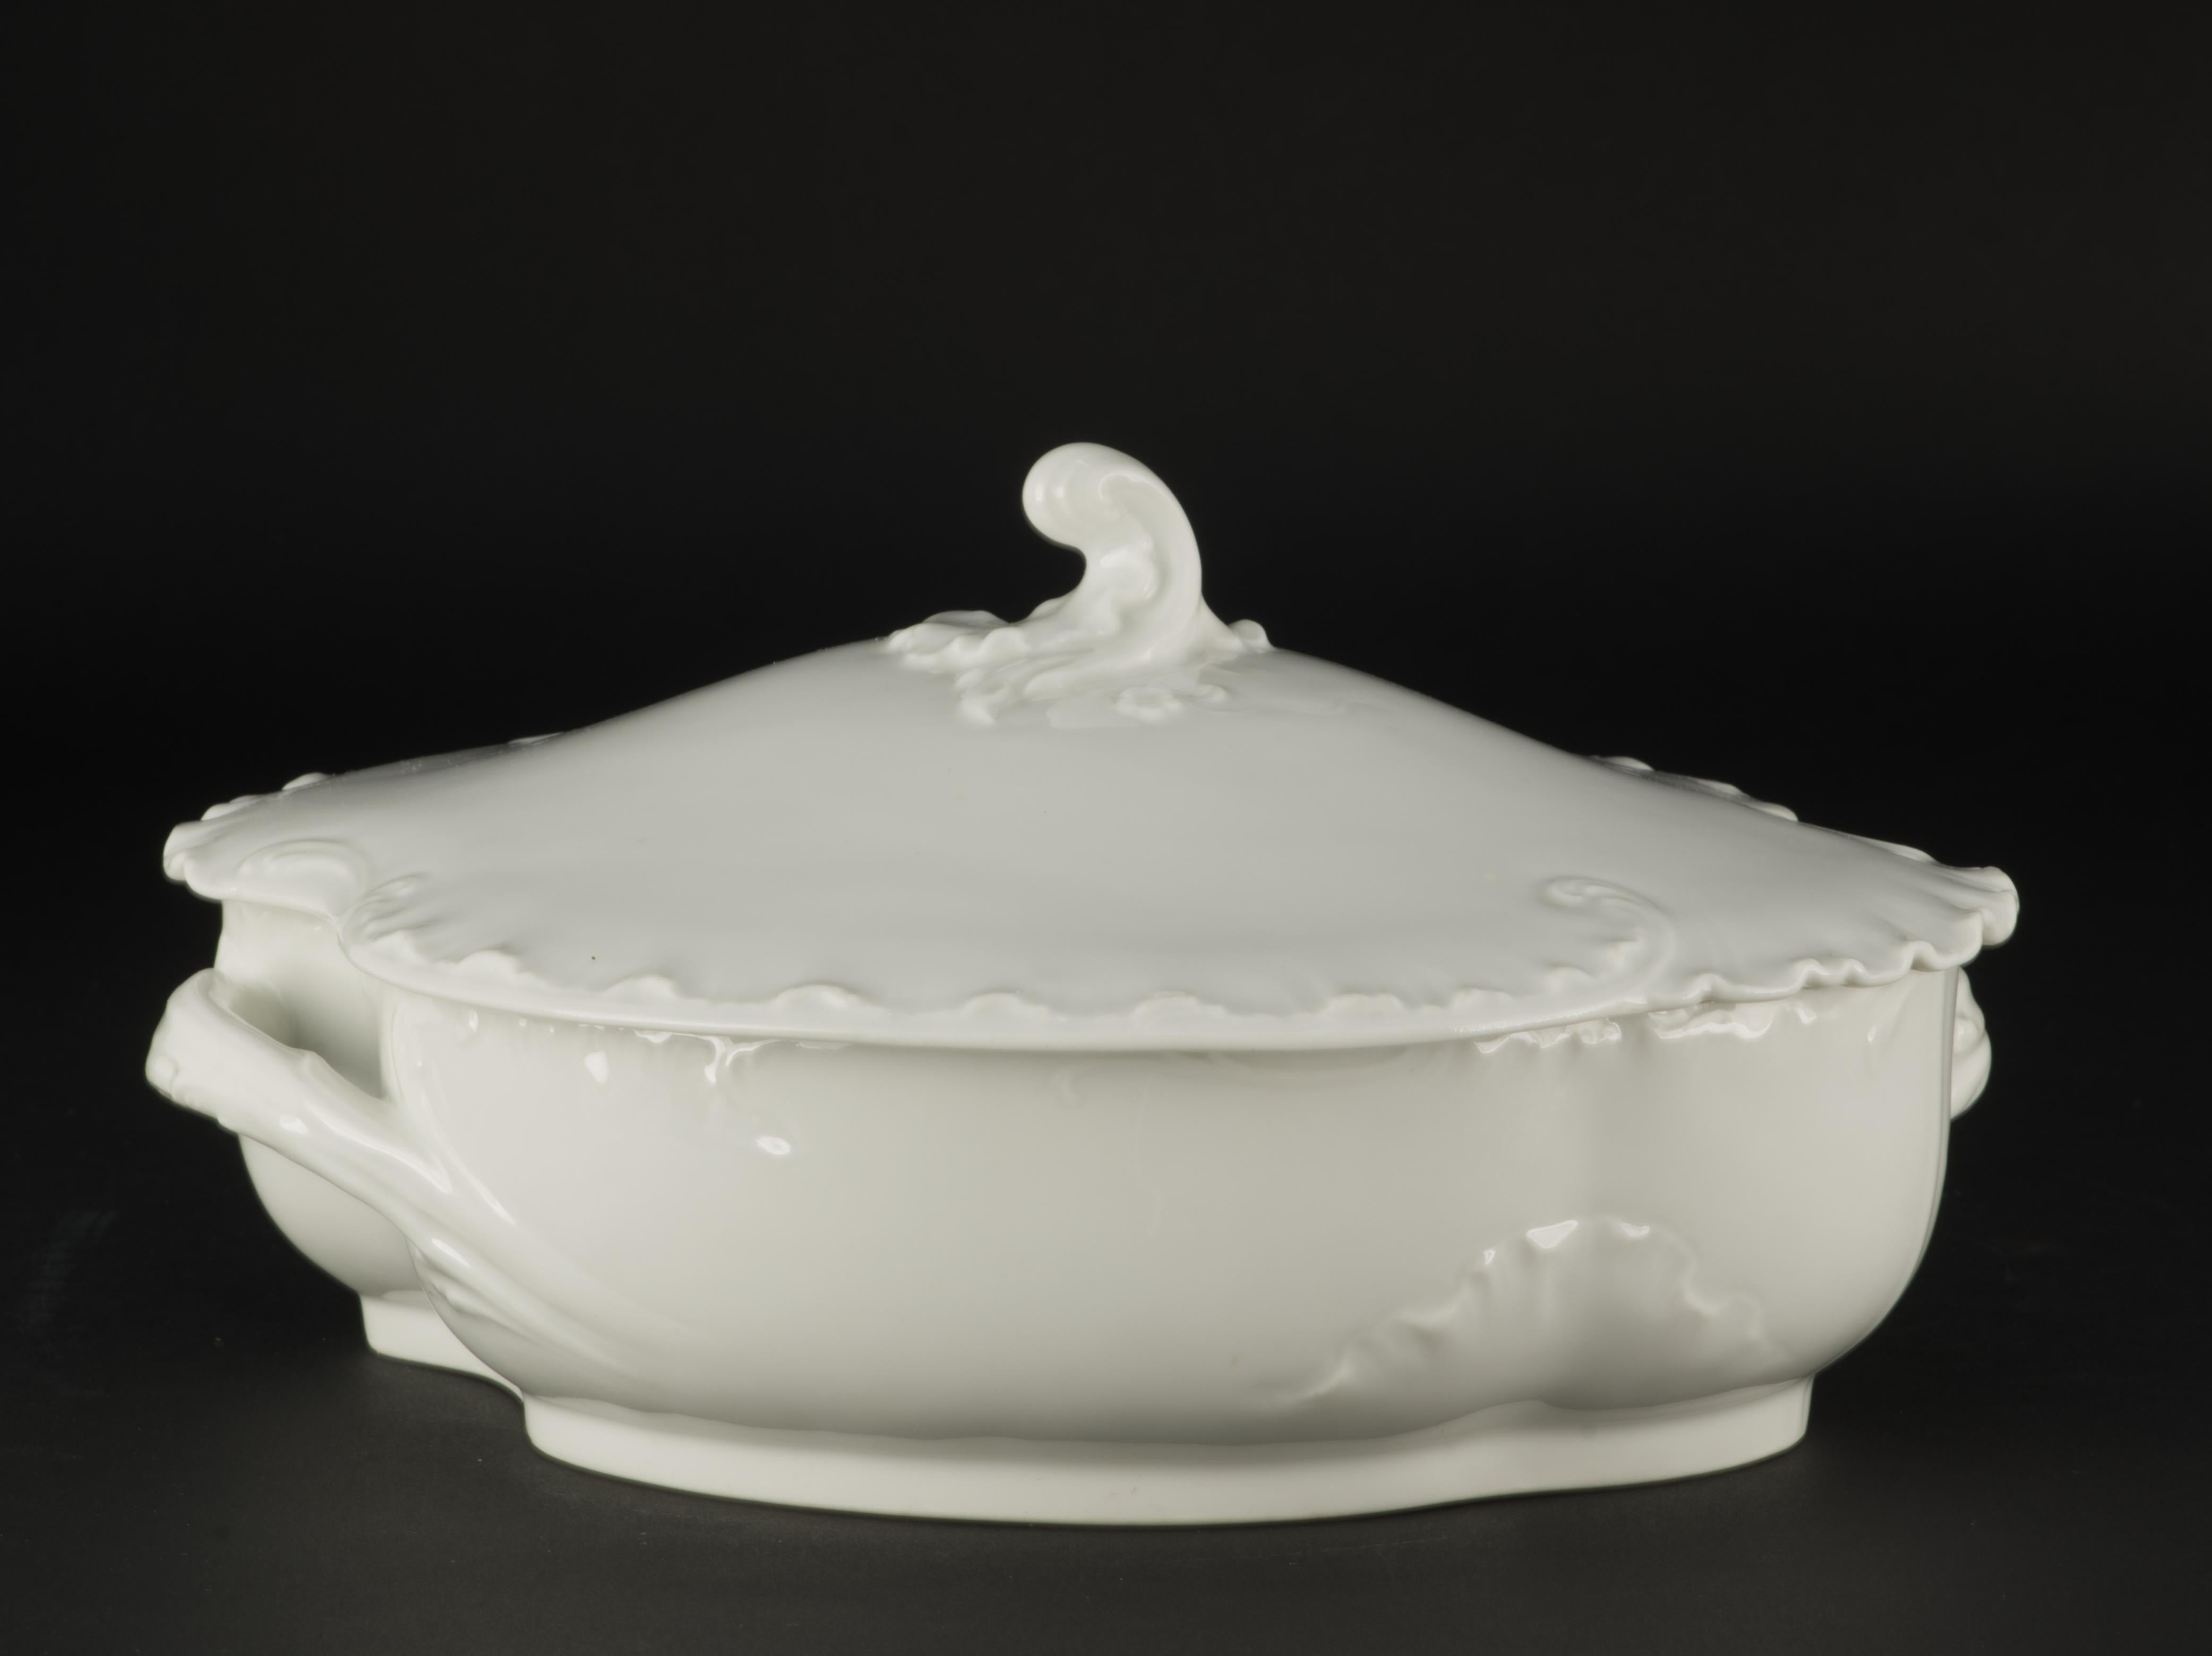 20th Century Haviland Limoges Oval Marseille Bowl with Cover, White Porcelain, 1894-1931 For Sale